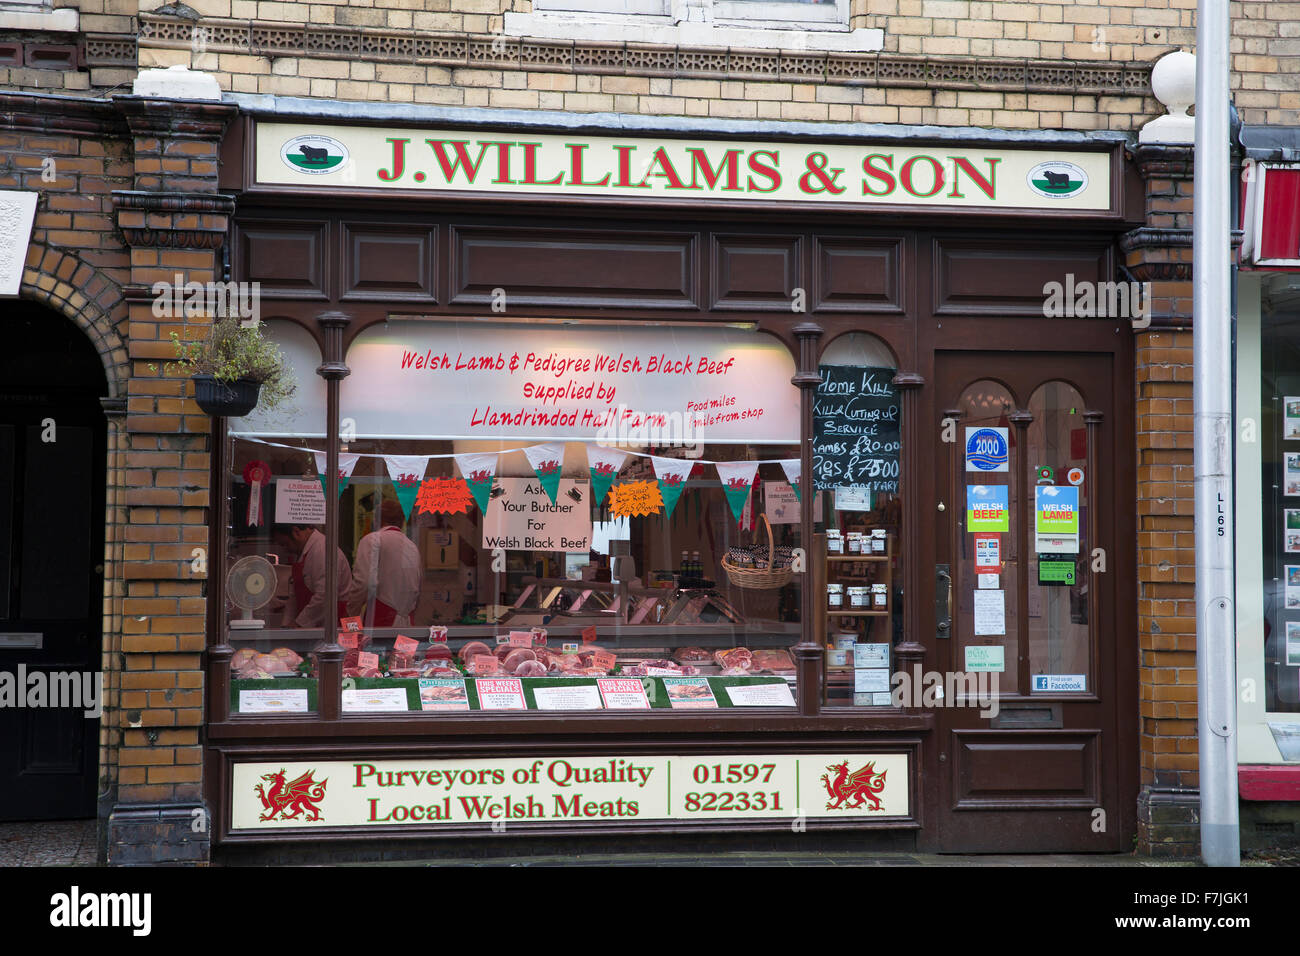 J Williams & Son butchers in Builth Wells Wales Stock Photo